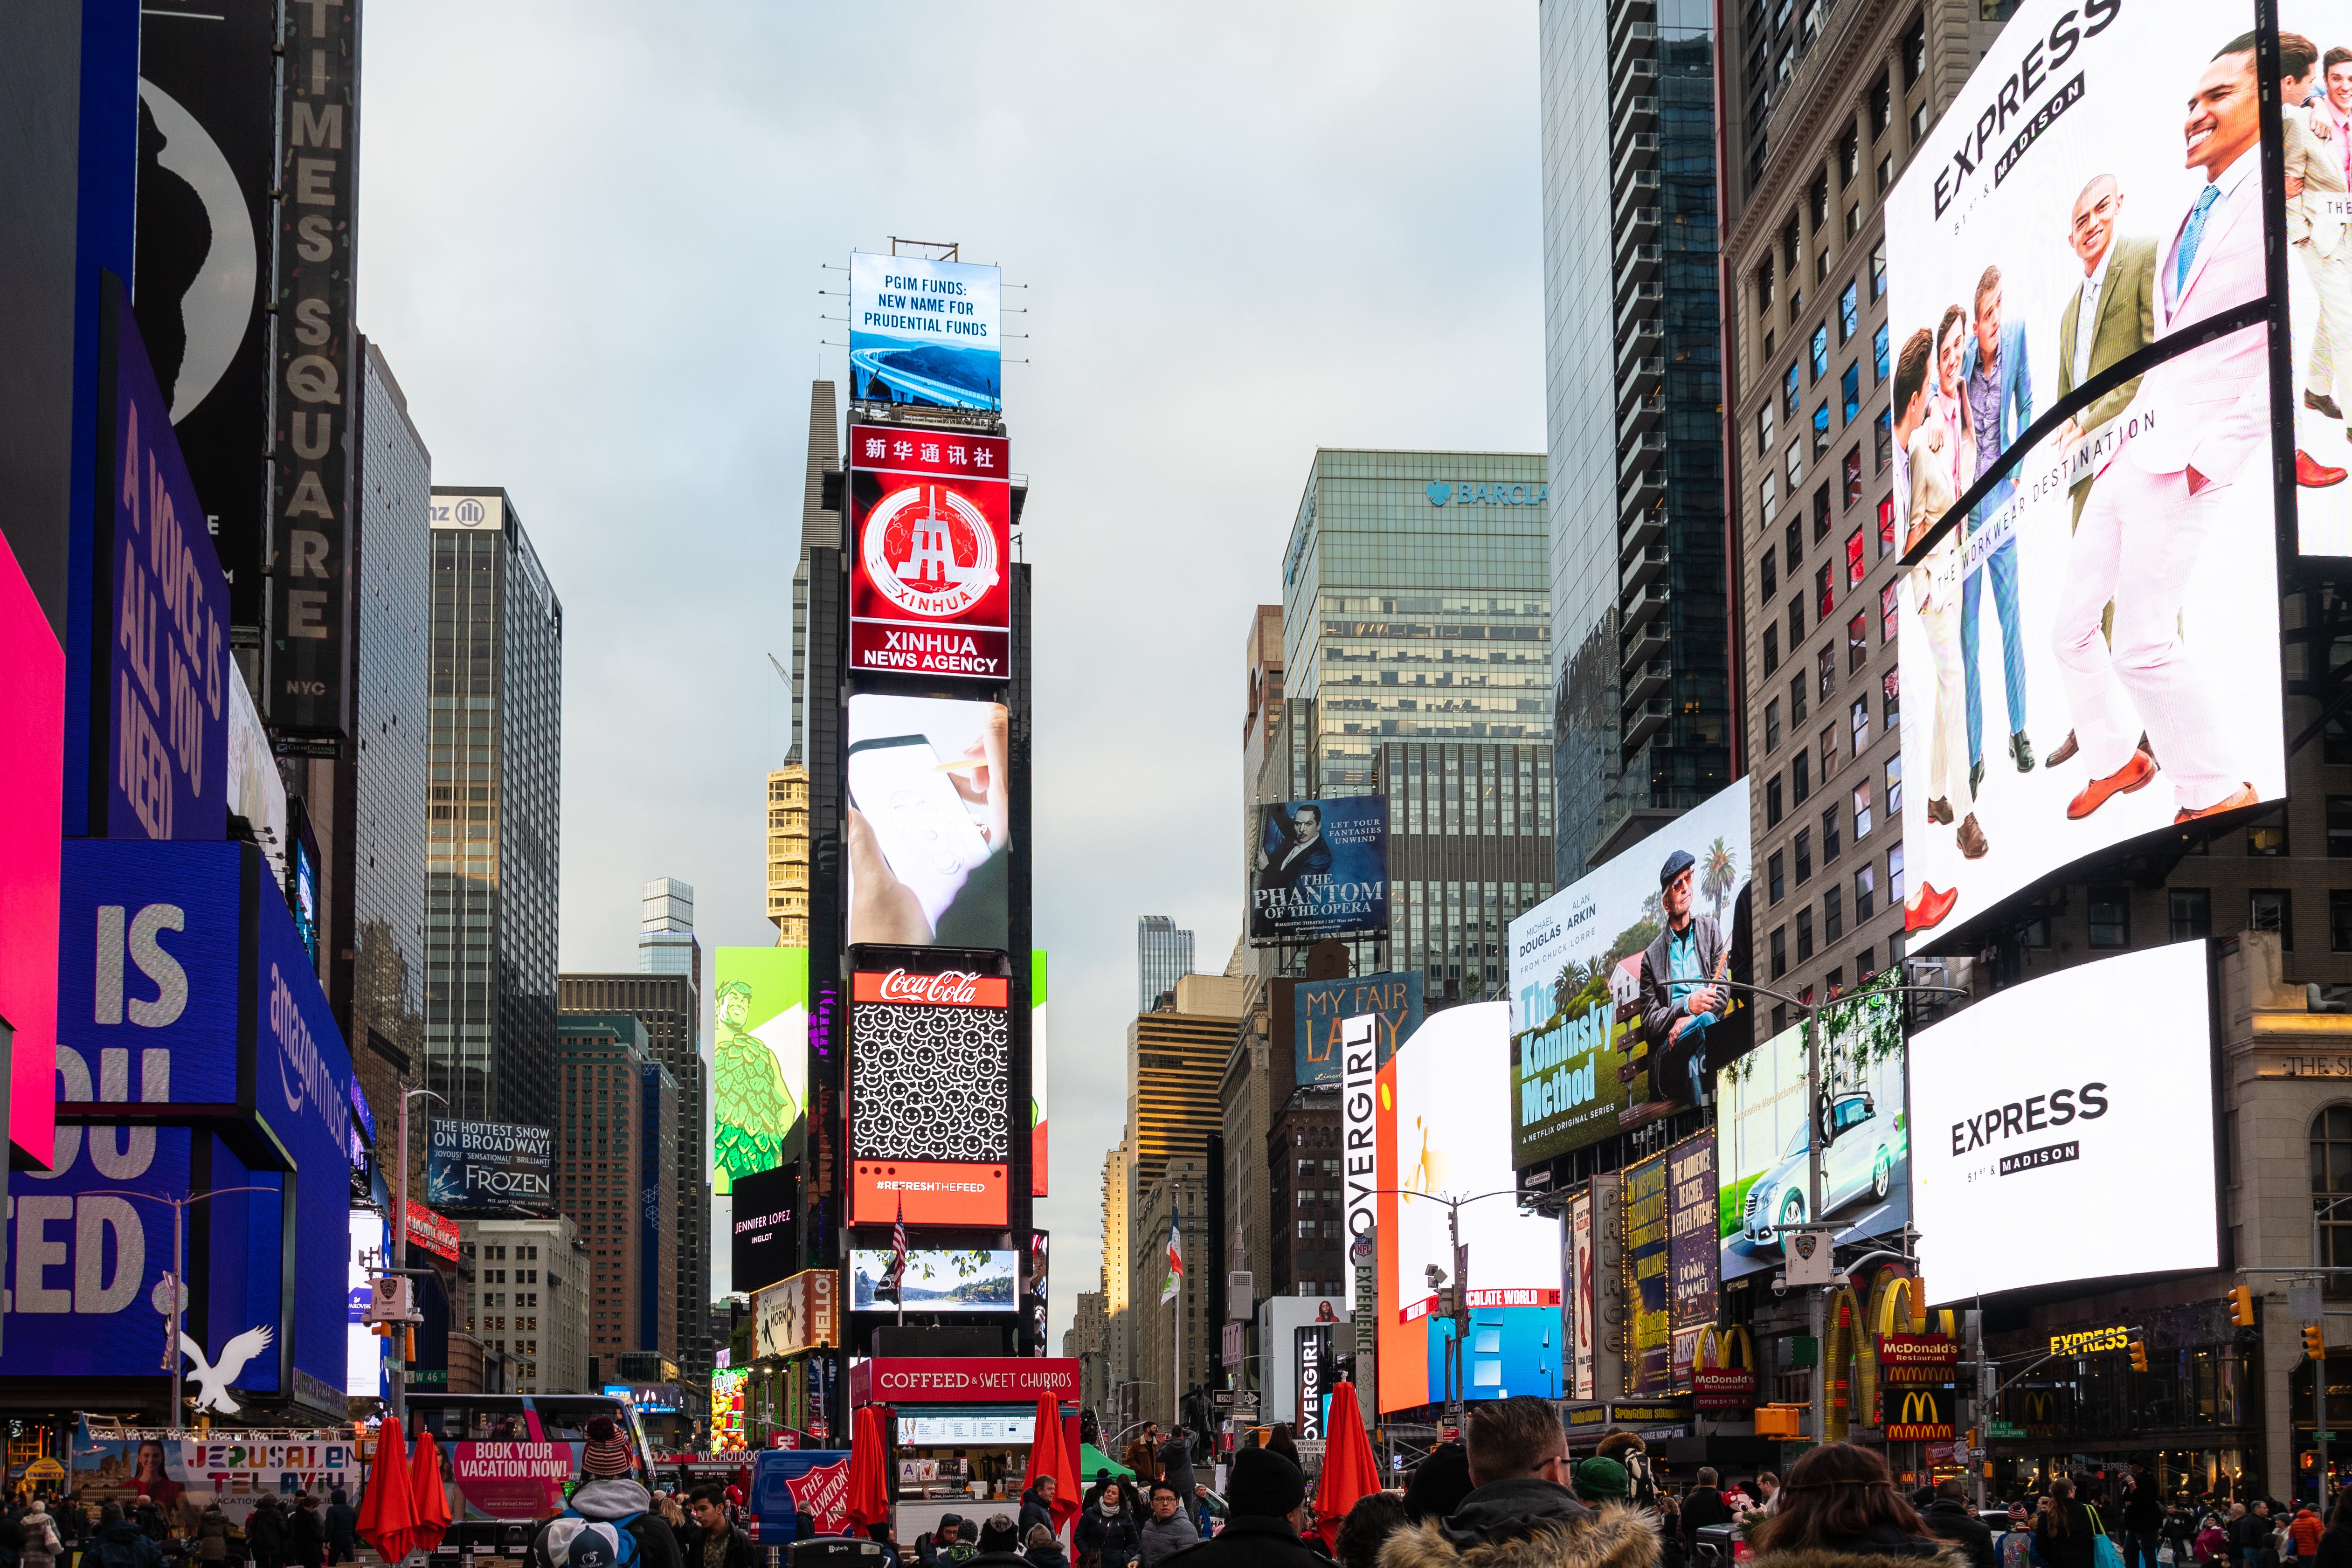 Man arrested for allegedly planning attack on Times Square